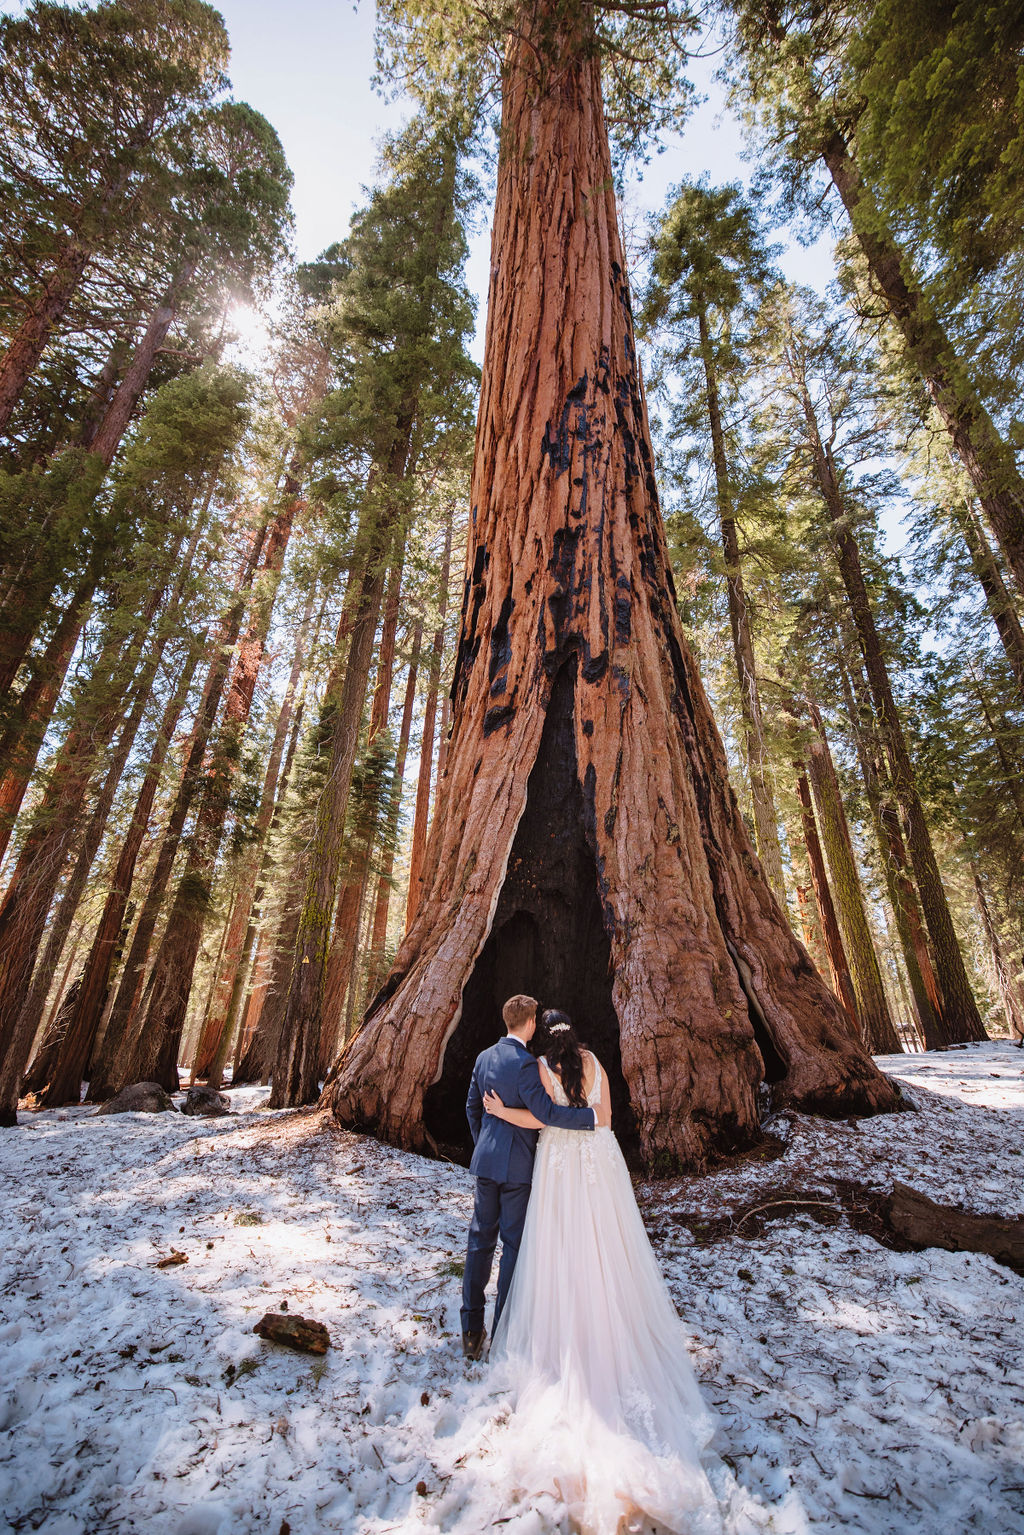 A bride and groom in a forest, surrounded by tall trees, with the bride wearing a long, flowing wedding gown